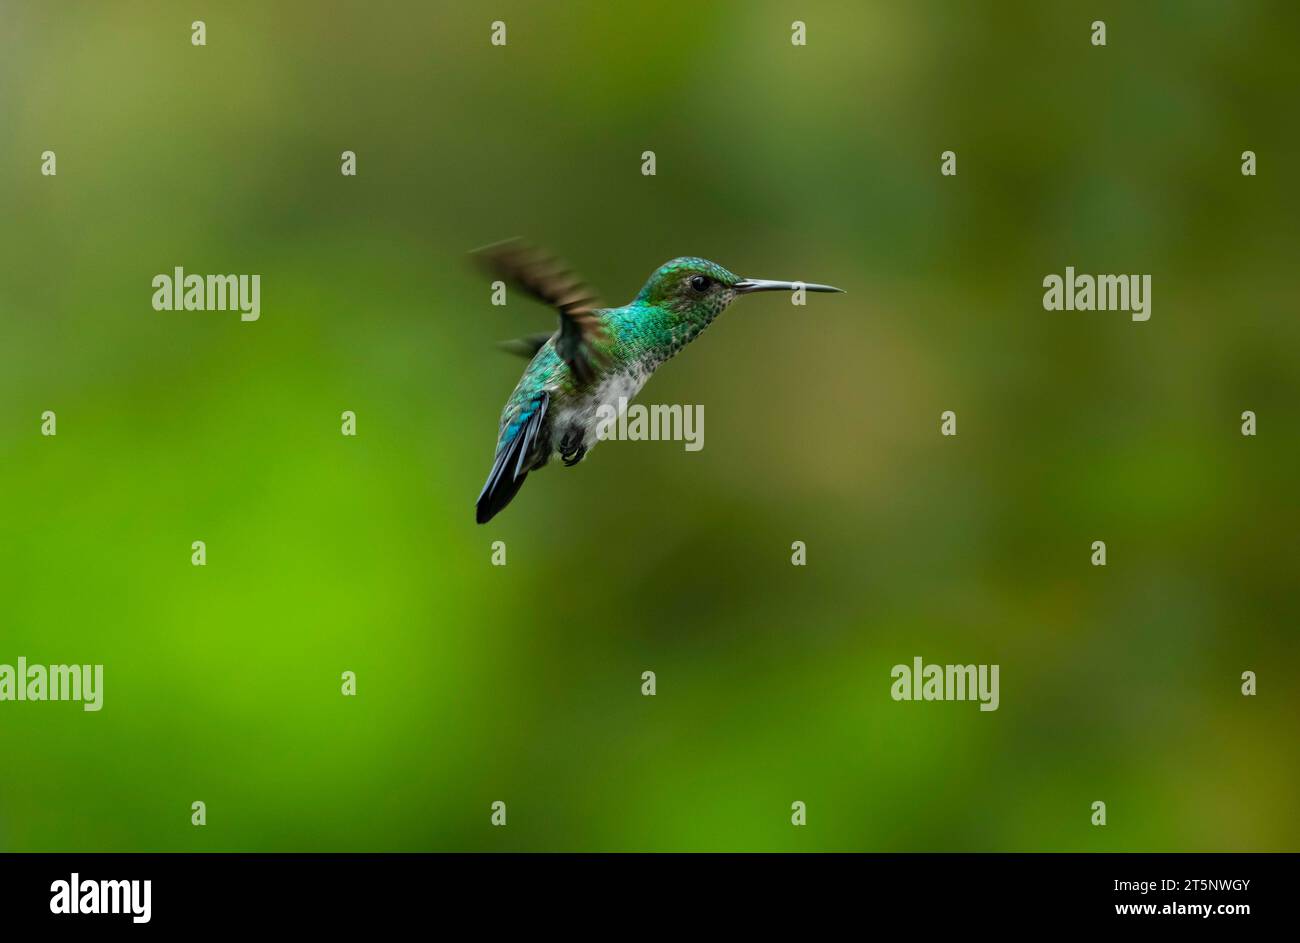 Blue-chinned Sapphire hummingbird, Chlorestes notata, hovering in the air with green background Stock Photo